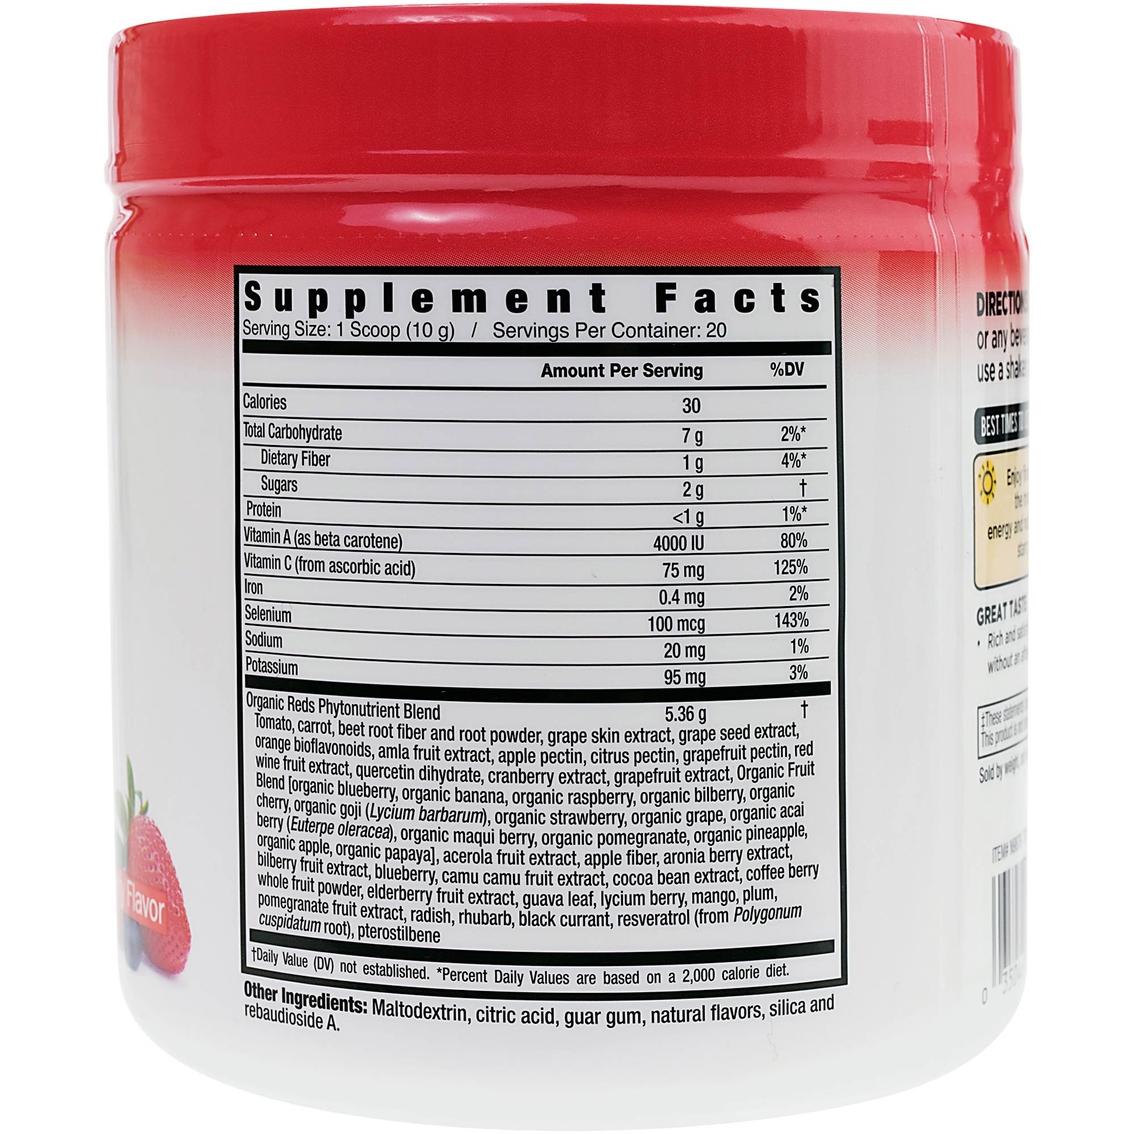 Country Farms Super Reds 20 Servings - Image 2 of 3